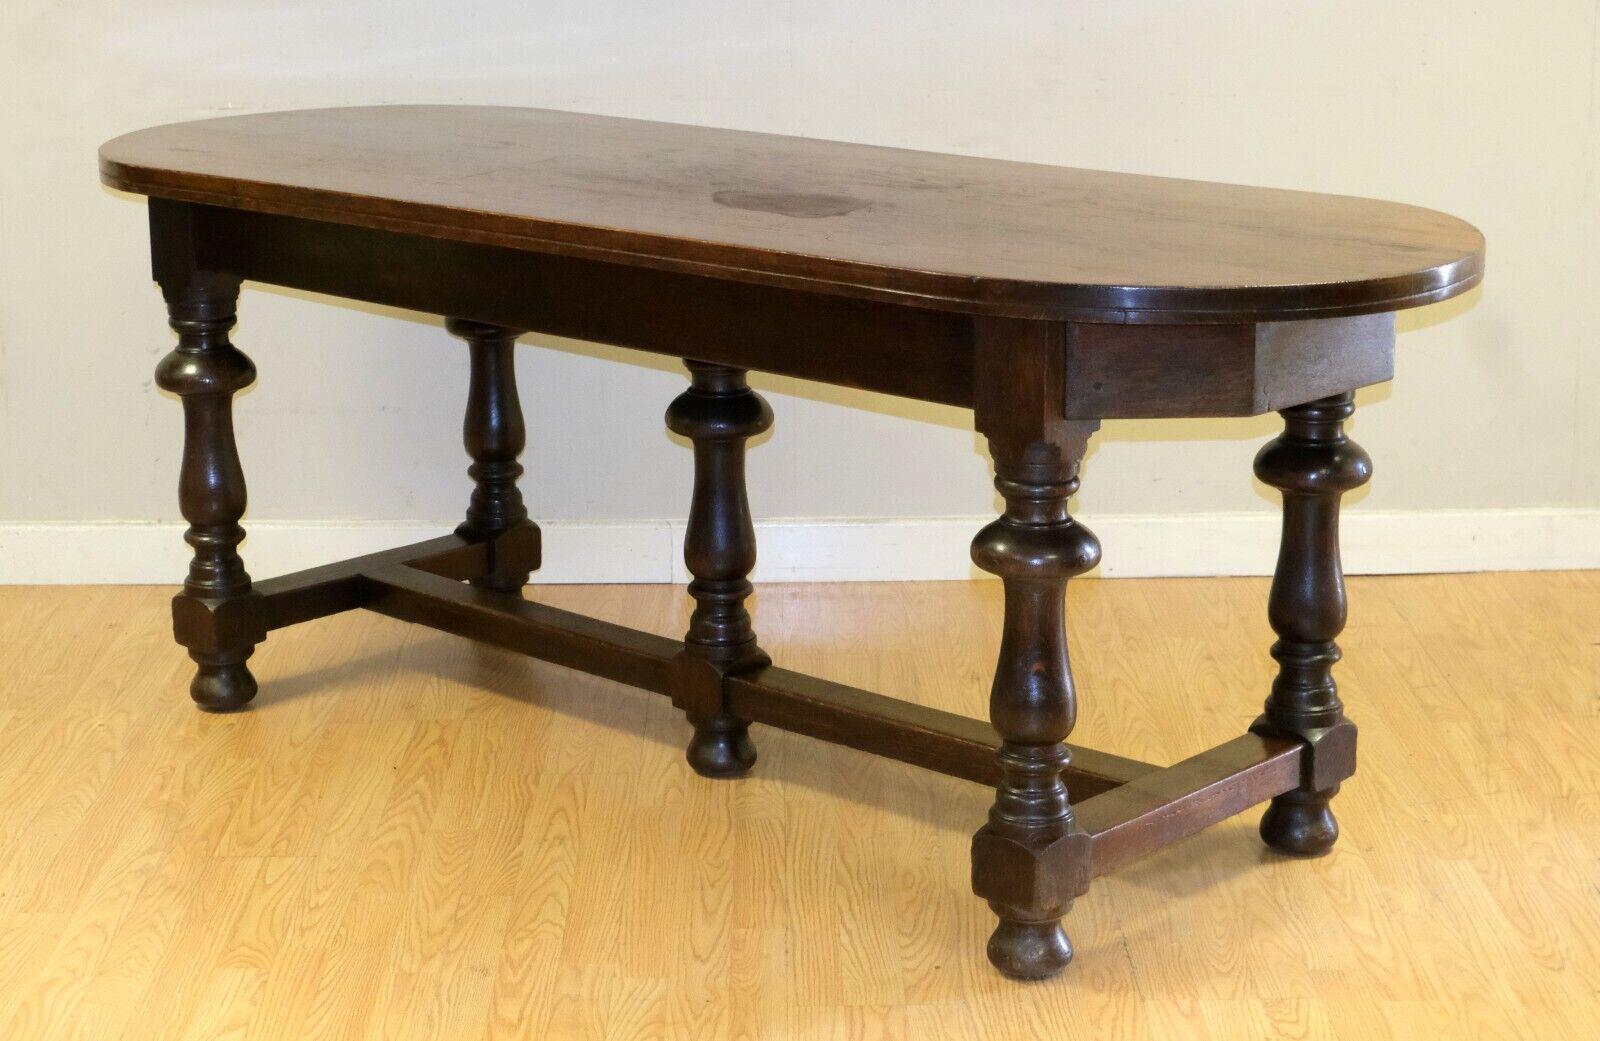 Victorian Gorgeous 19th Century Solid Oak Hall Refectory Dining Table on Thick Turned Legs